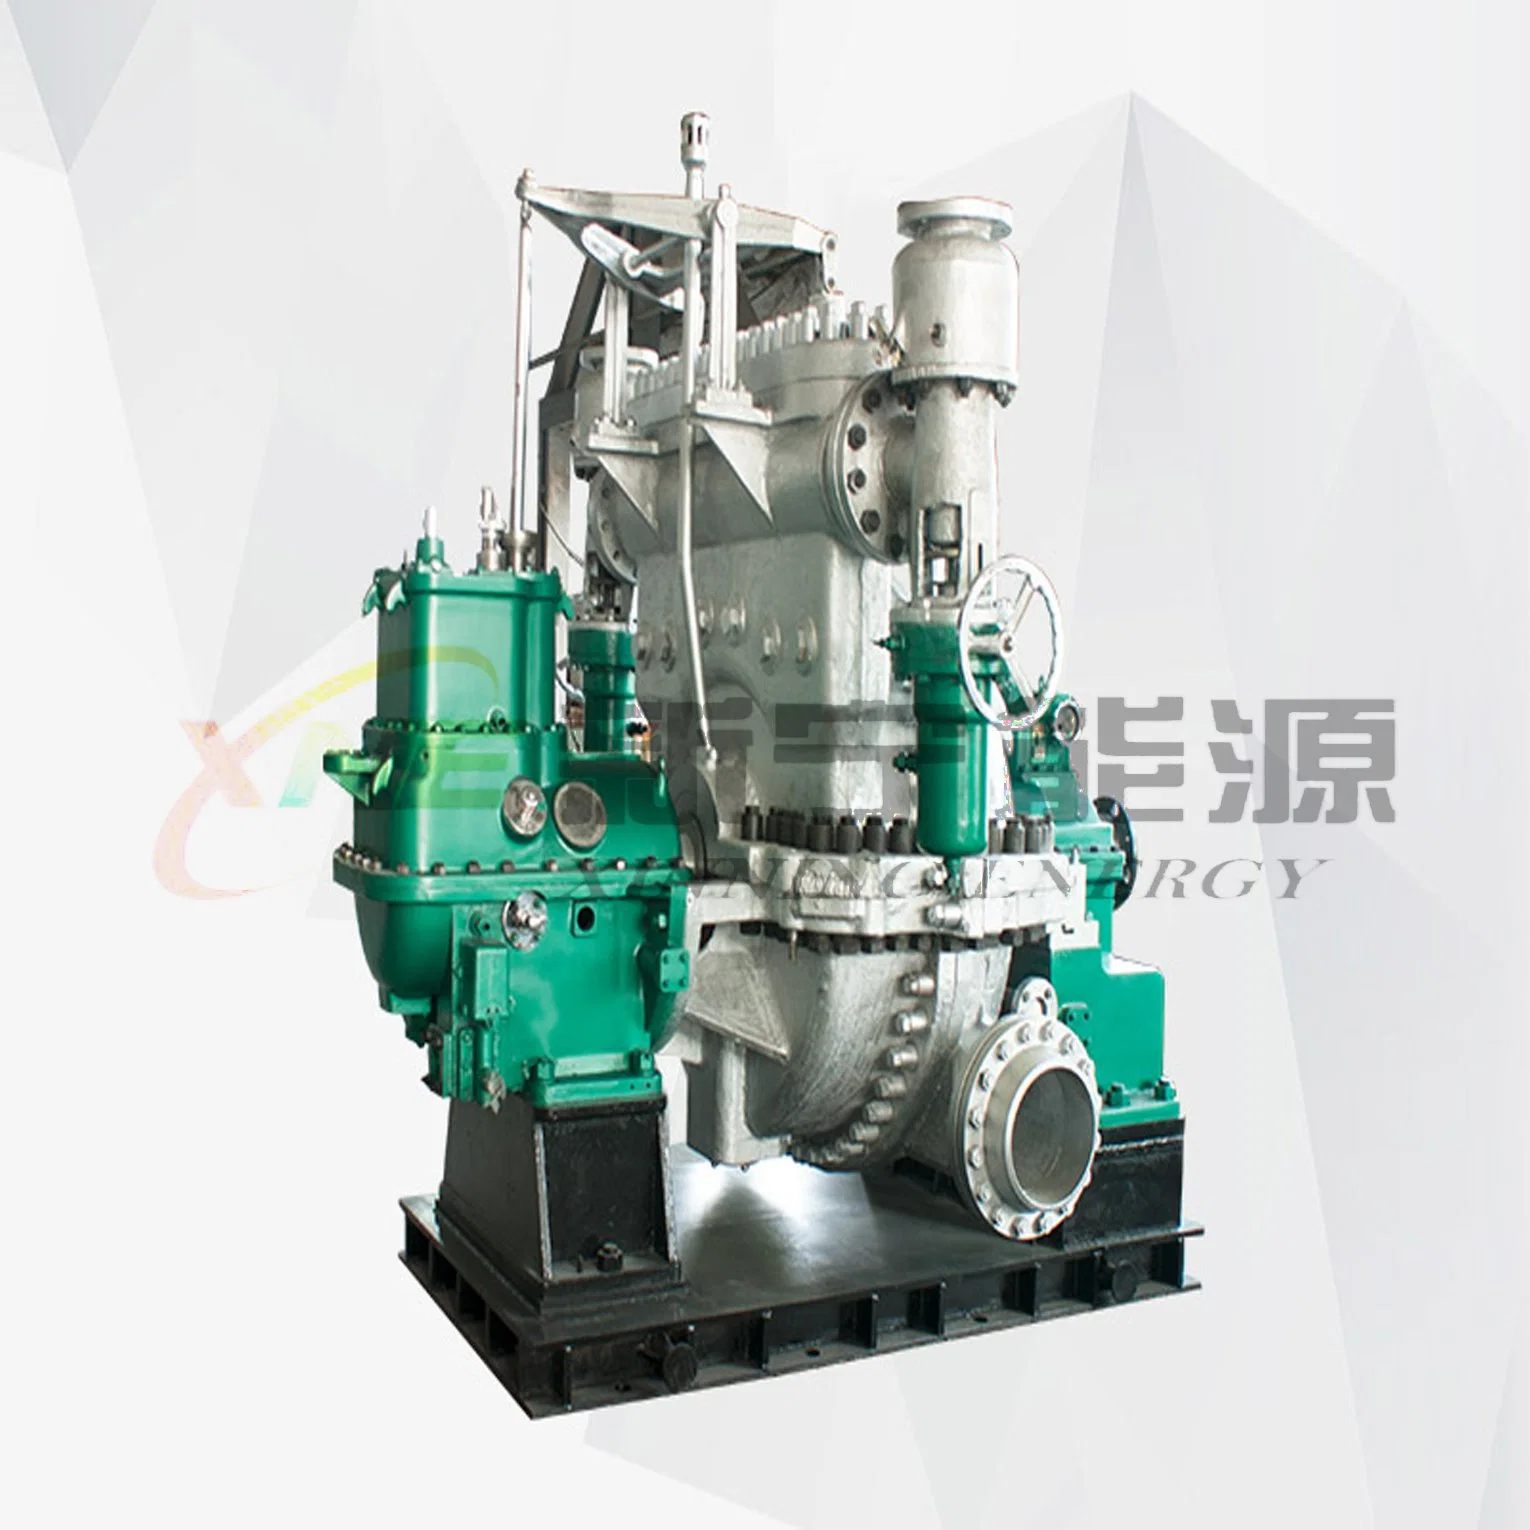 Single Stage Back Pressure Industrial Steam Turbine for Direct Drive Boiler Feed Water Pumps